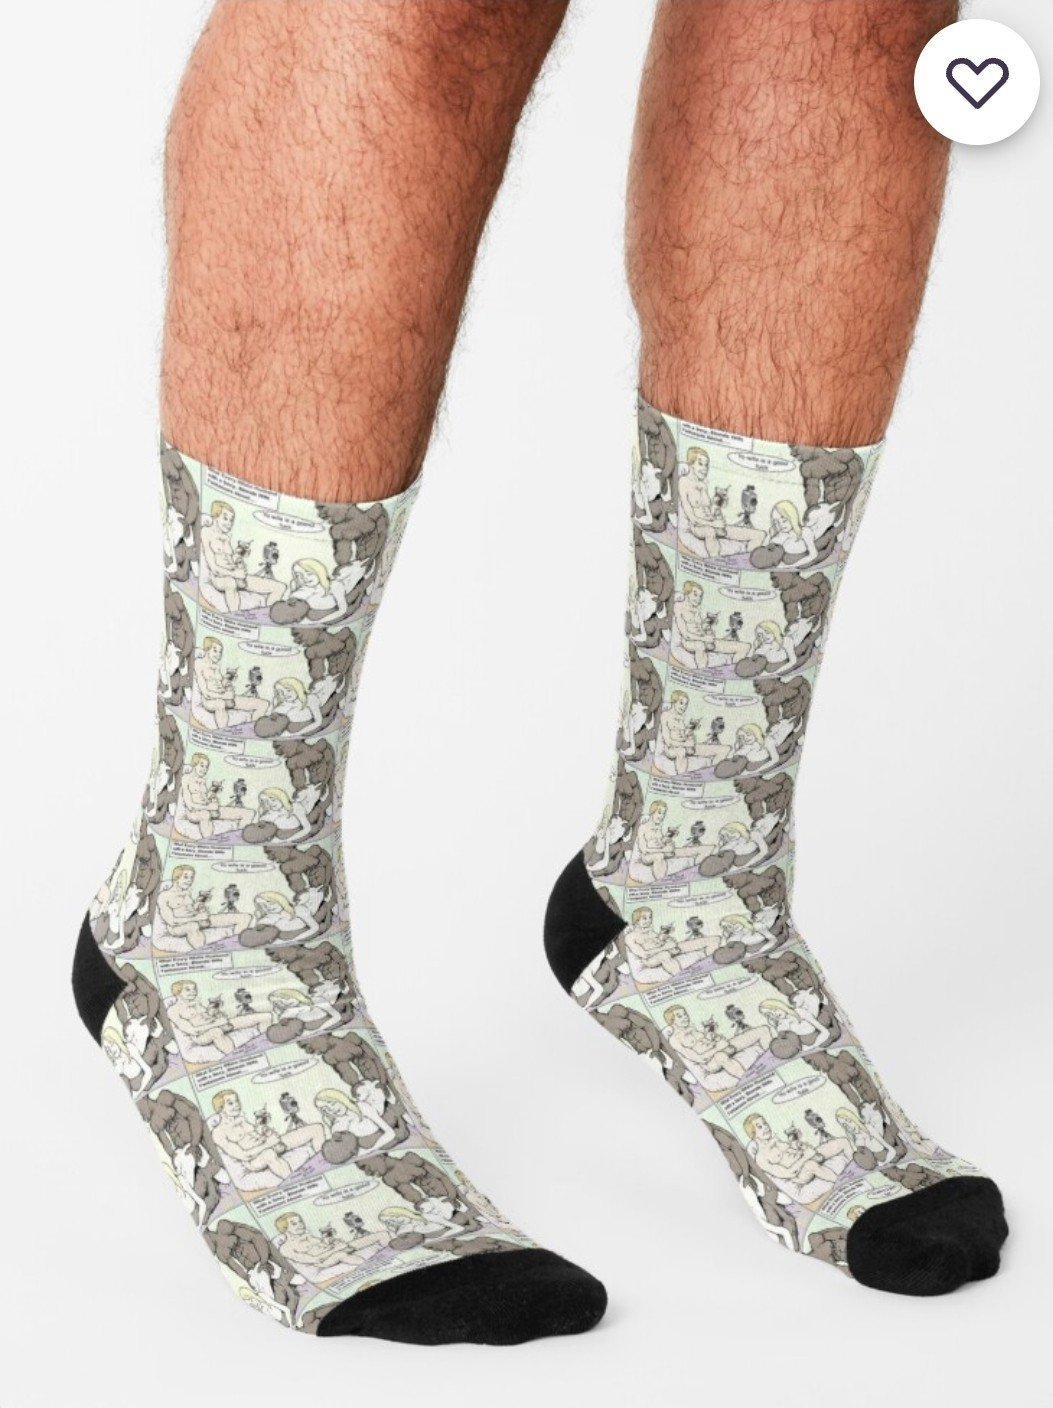 Photo by Niftywizard with the username @Niftywizard, who is a verified user,  October 8, 2023 at 9:01 AM and the text says 'Hotwife socks
Adult hotwife socks https://www.redbubble.com/shop/ap/153354921?asc=u'